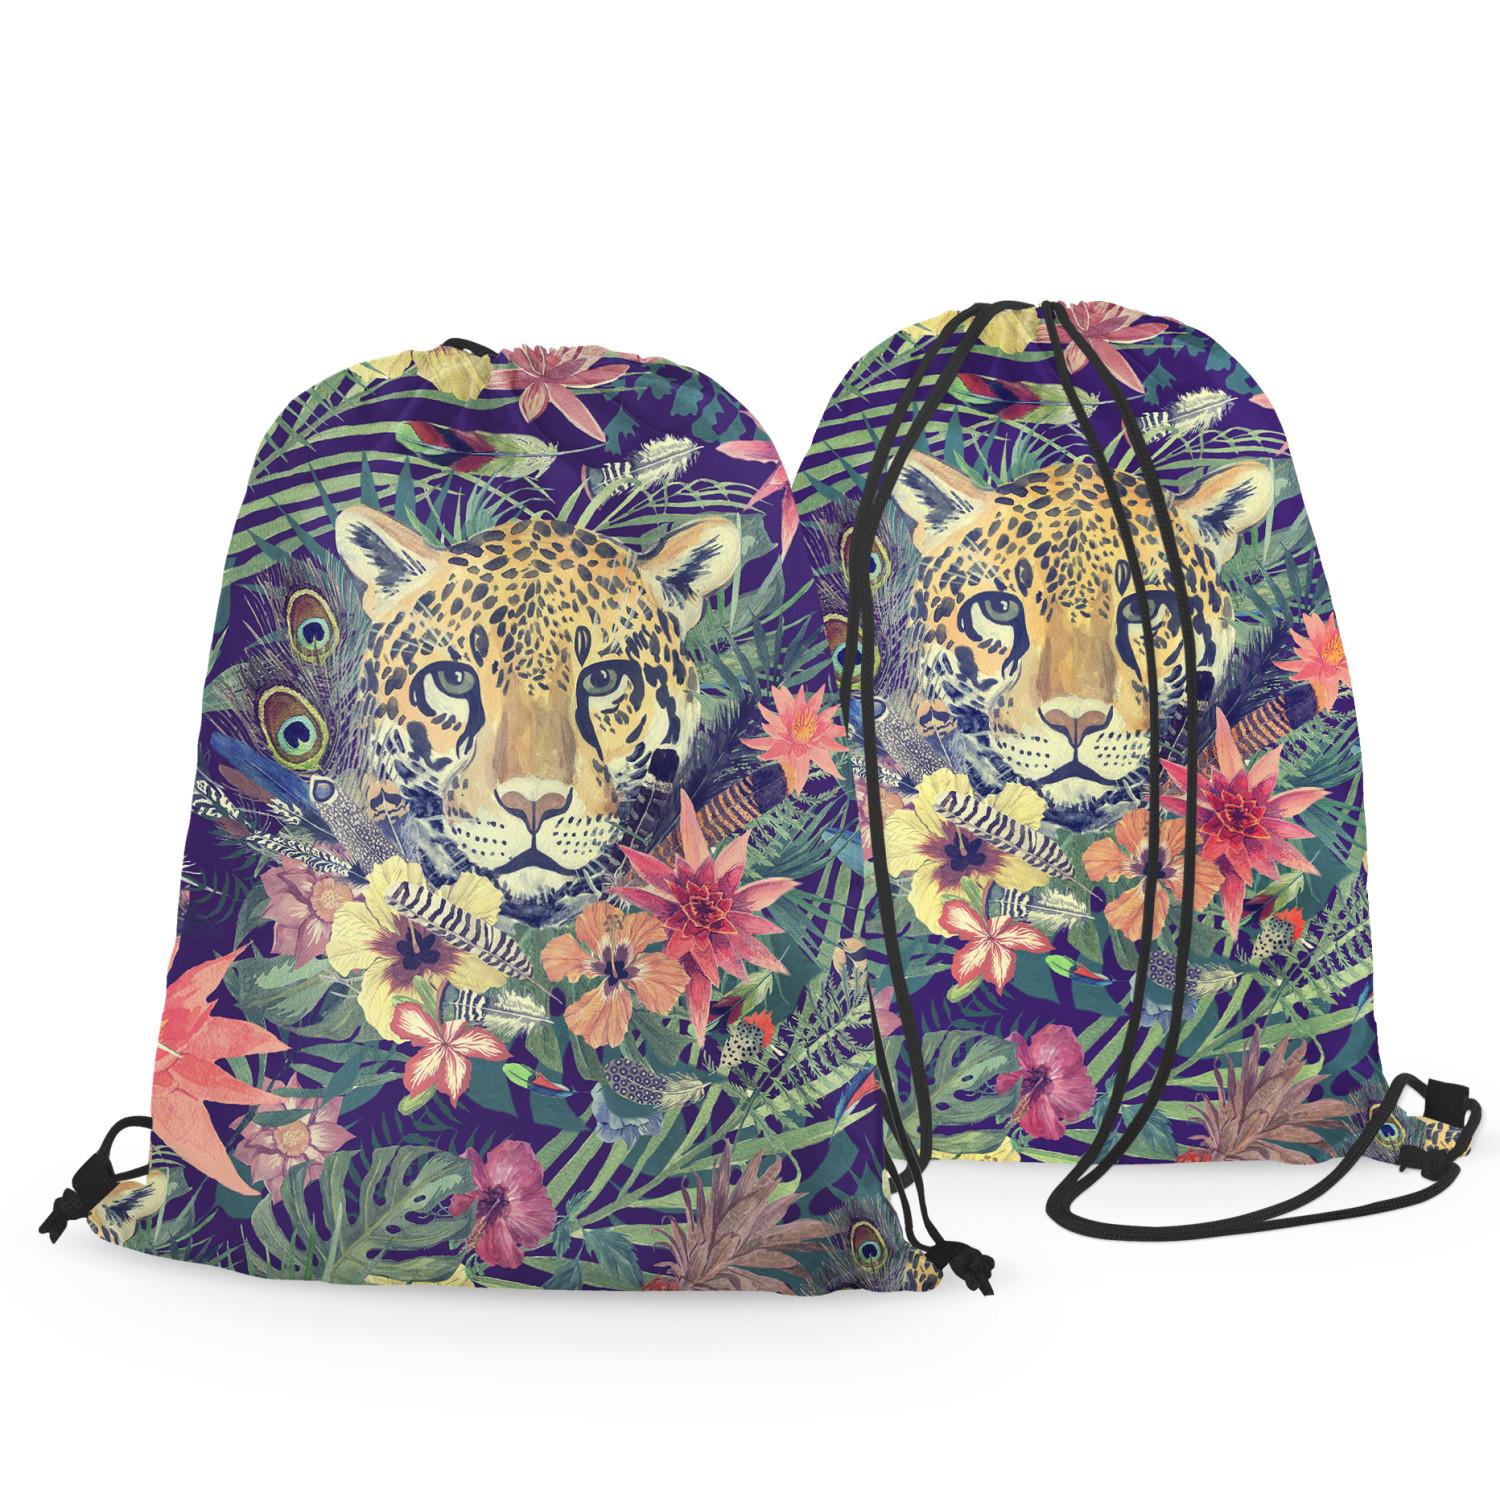 Backpack Cheetah in the leaves - wild animal, floral print in watercolour style